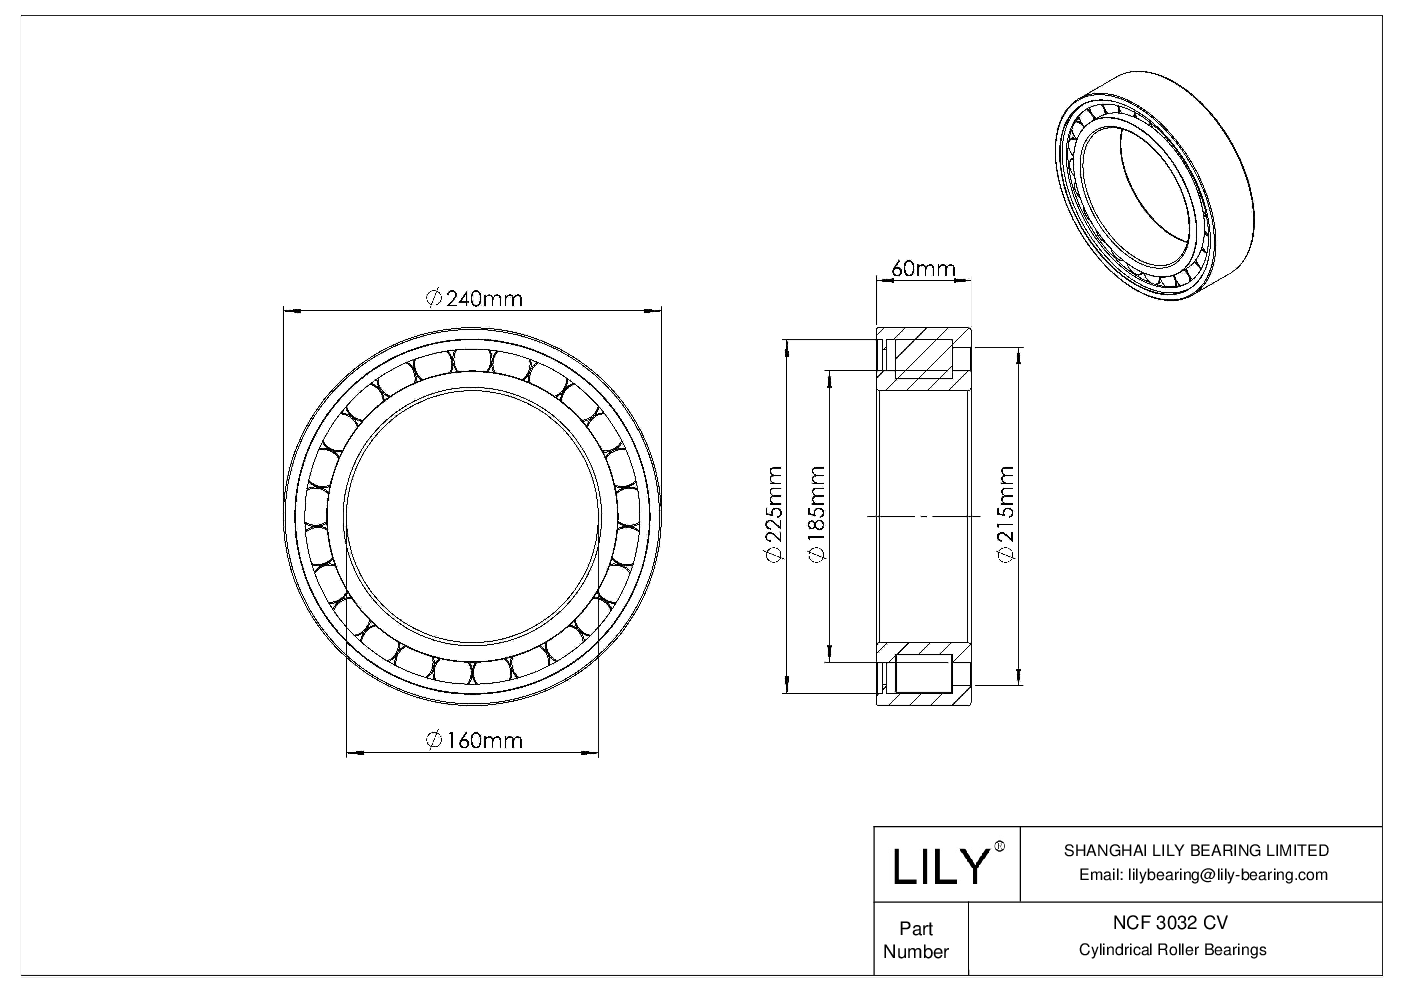 NCF 3032 CV Single Row Full Complement Cylindrical Roller Bearings cad drawing